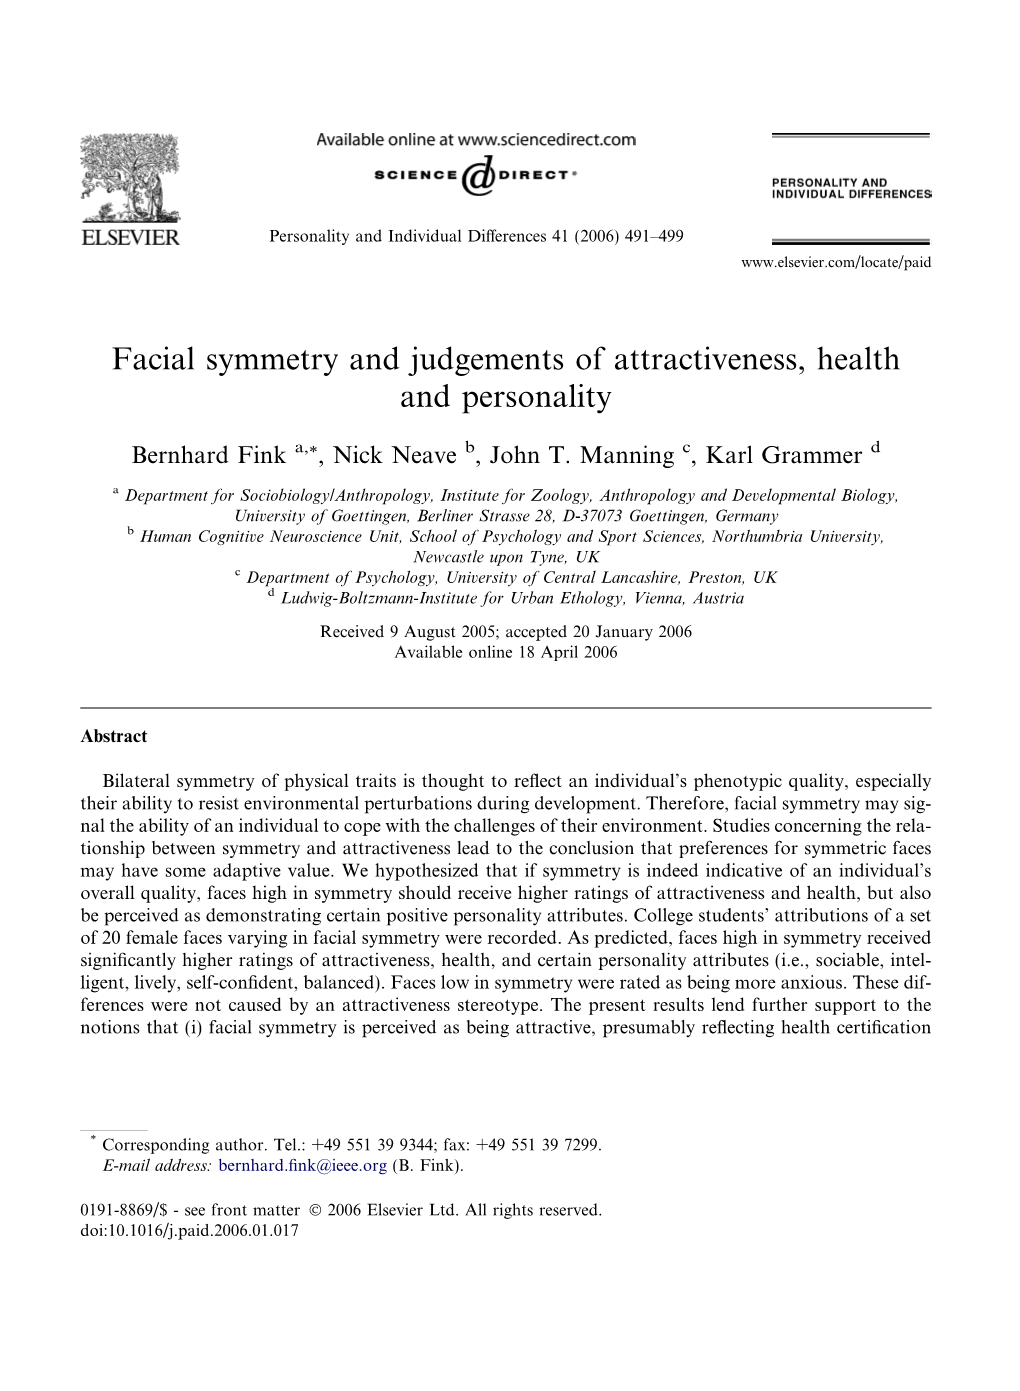 Facial Symmetry and Judgements of Attractiveness, Health and Personality